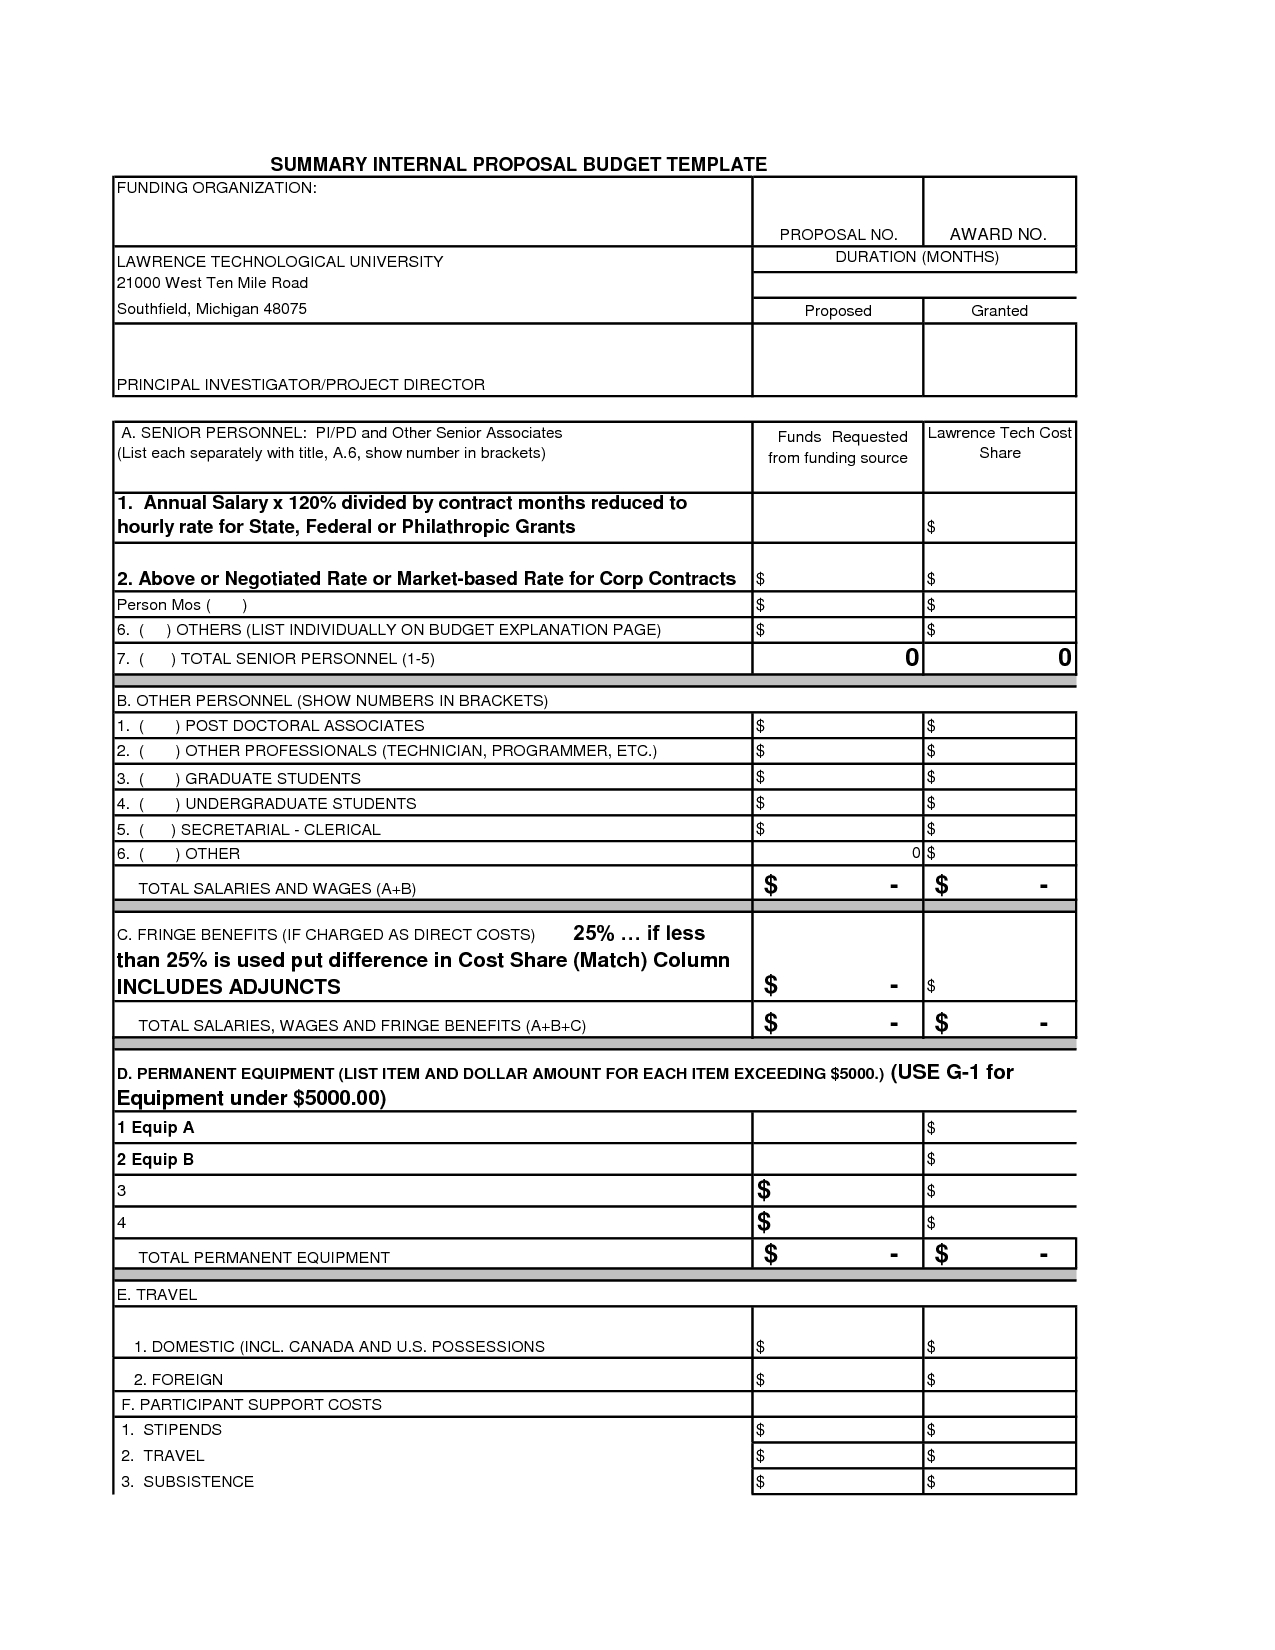 Sample Project Budget Template Grant Proposal  Plan with regard to Grant Proposal Budget Template